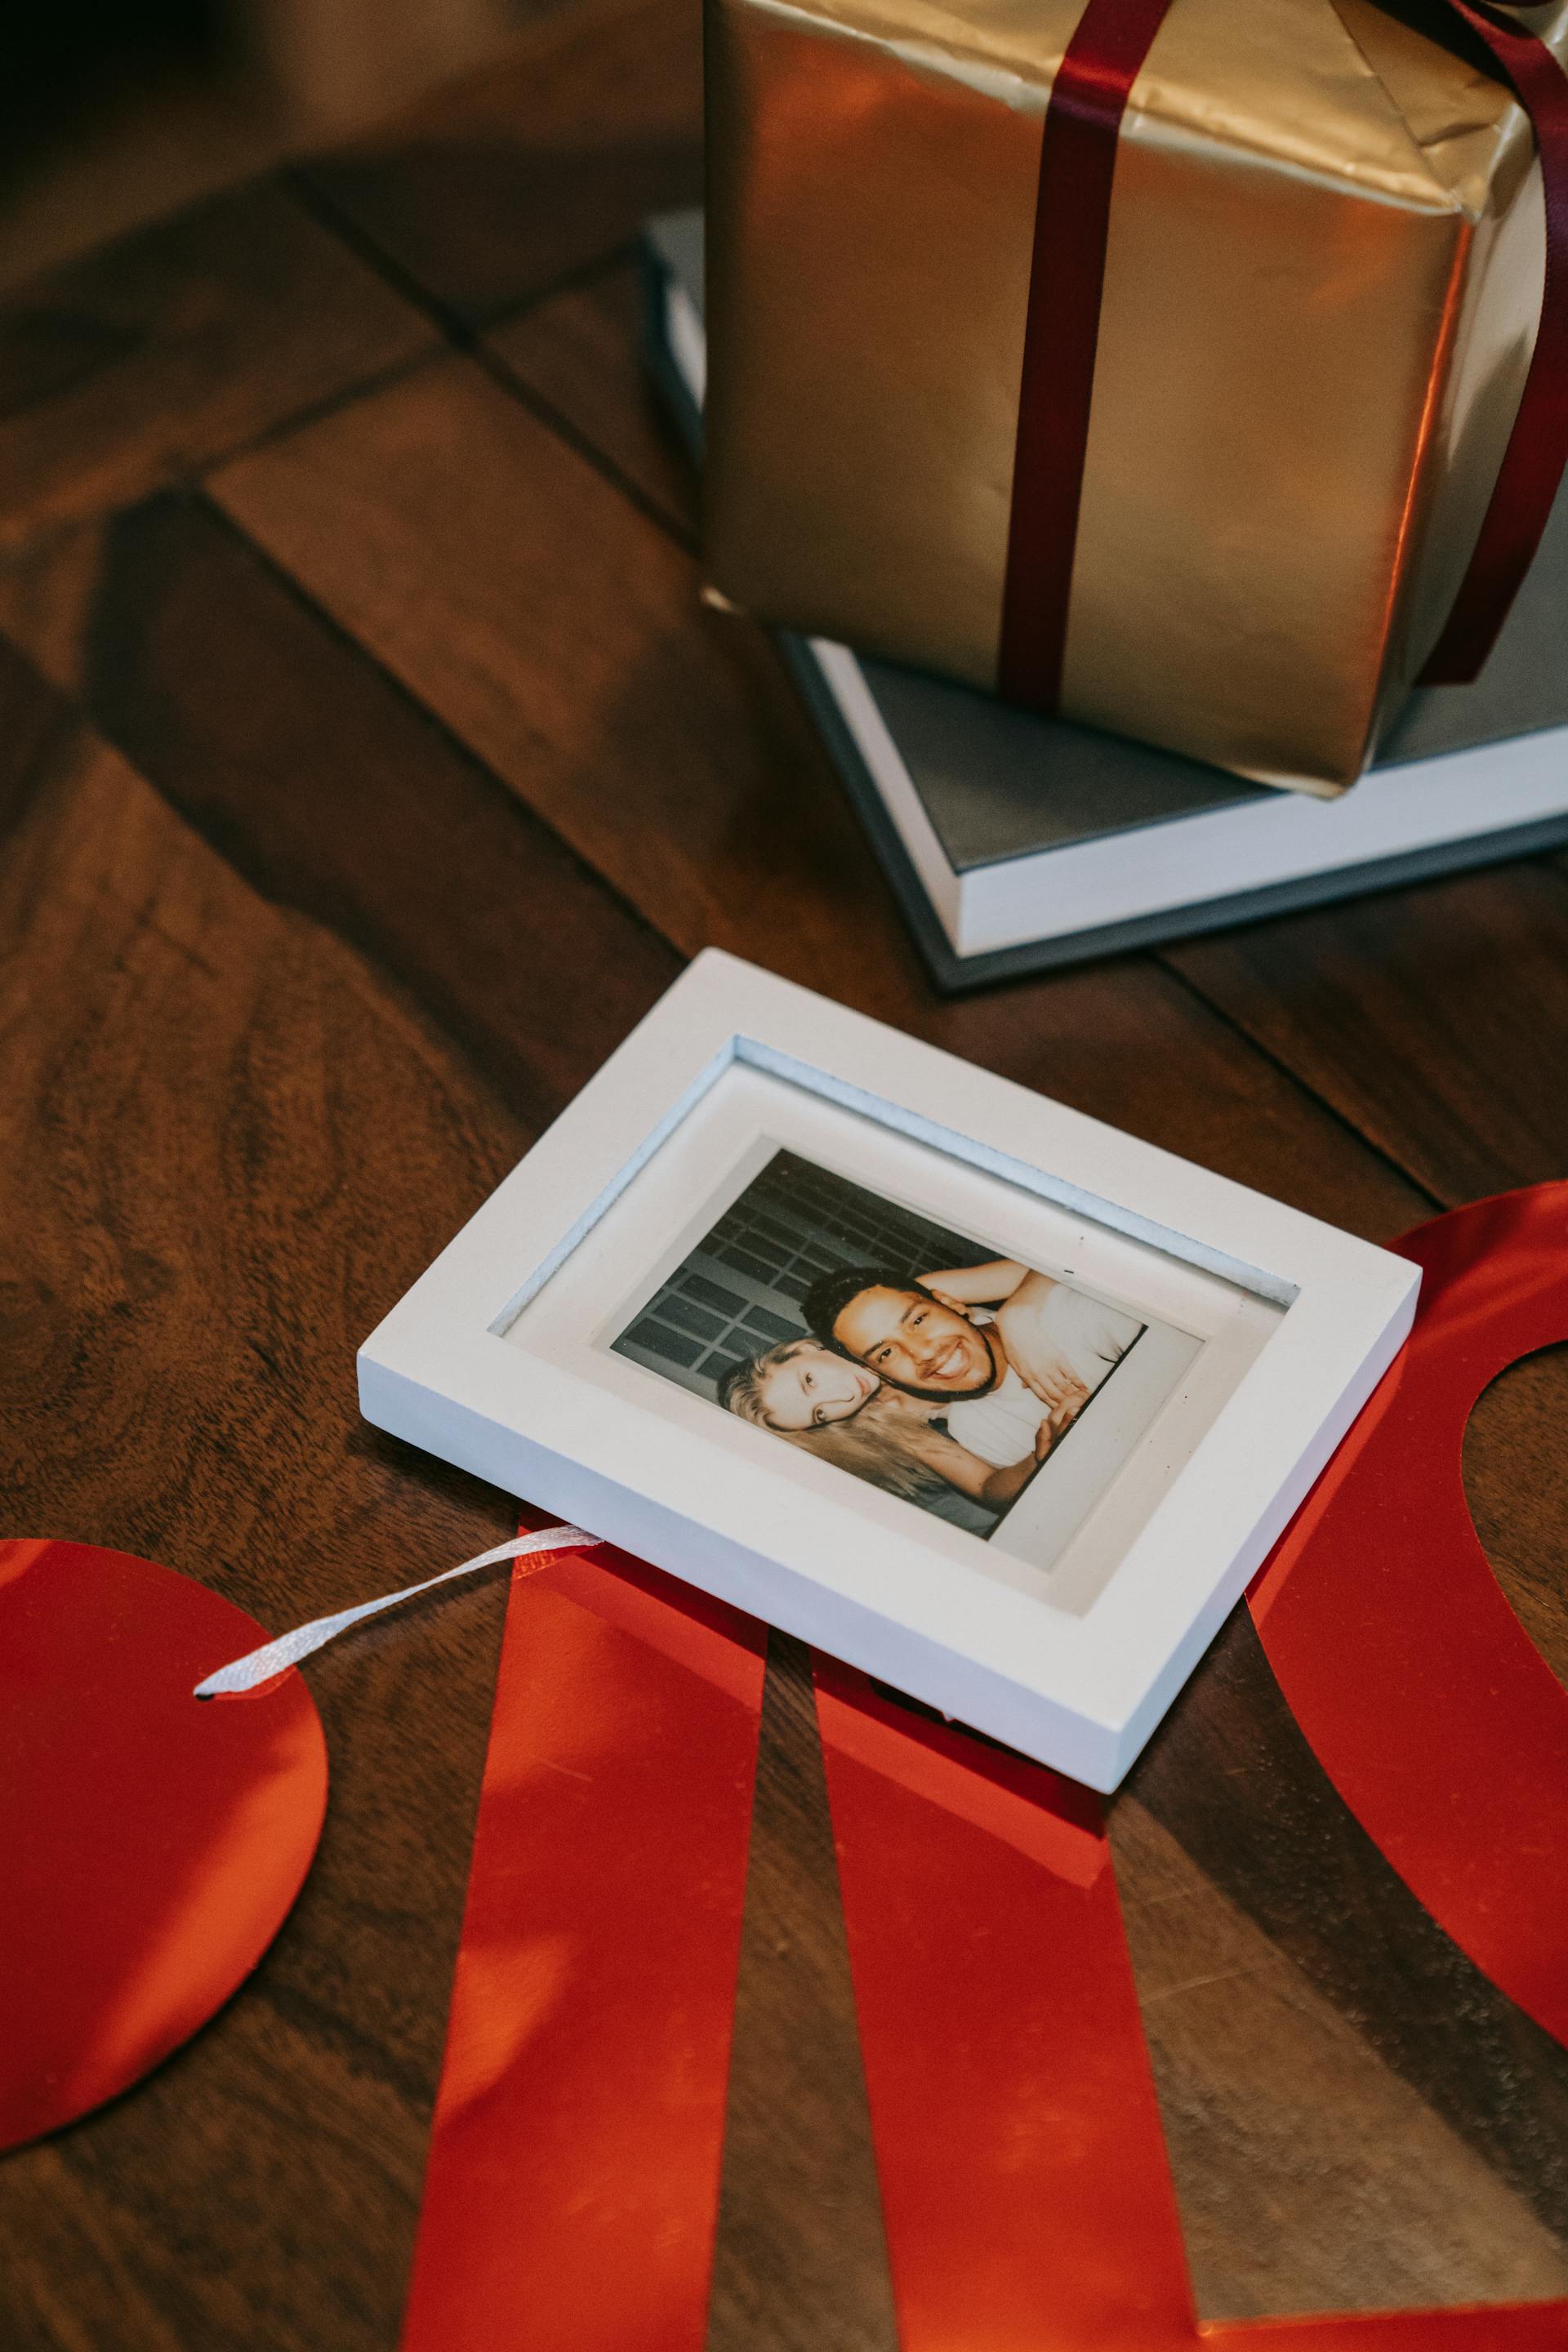 A couple's photograph in a wooden frame | Source: Pexels